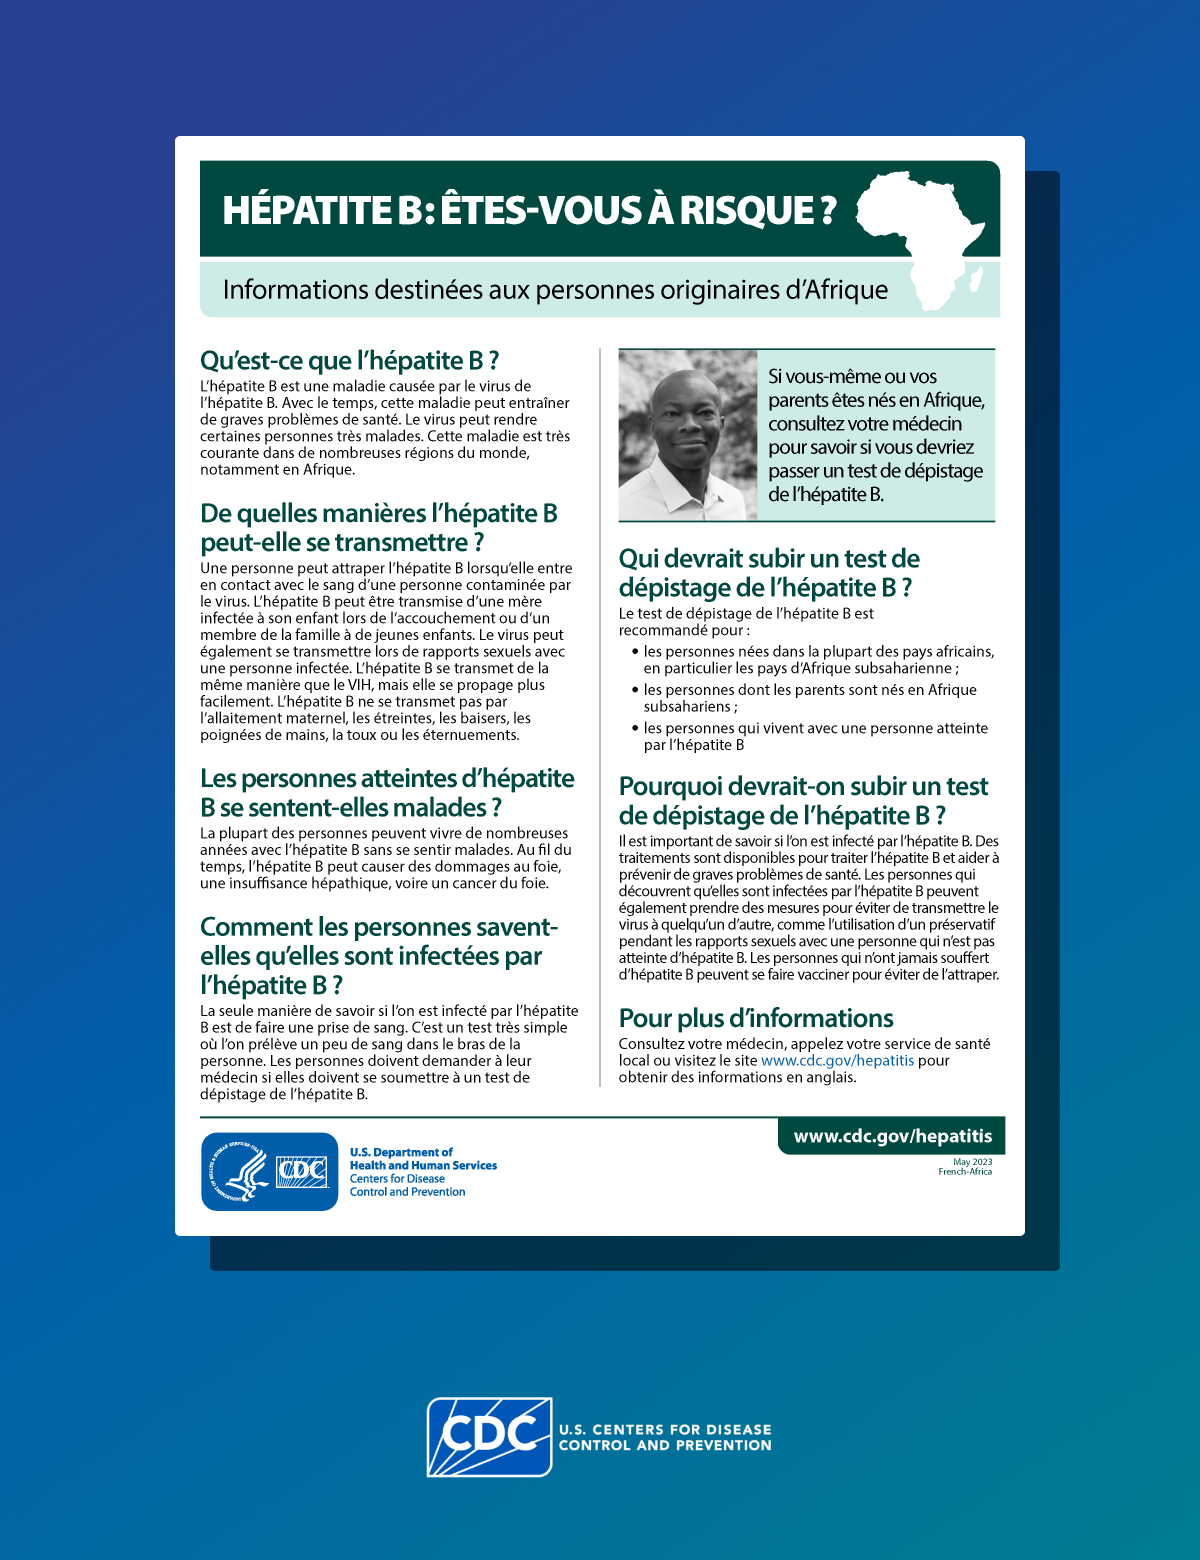 Poster in French discussing risk factors for hepatitis B